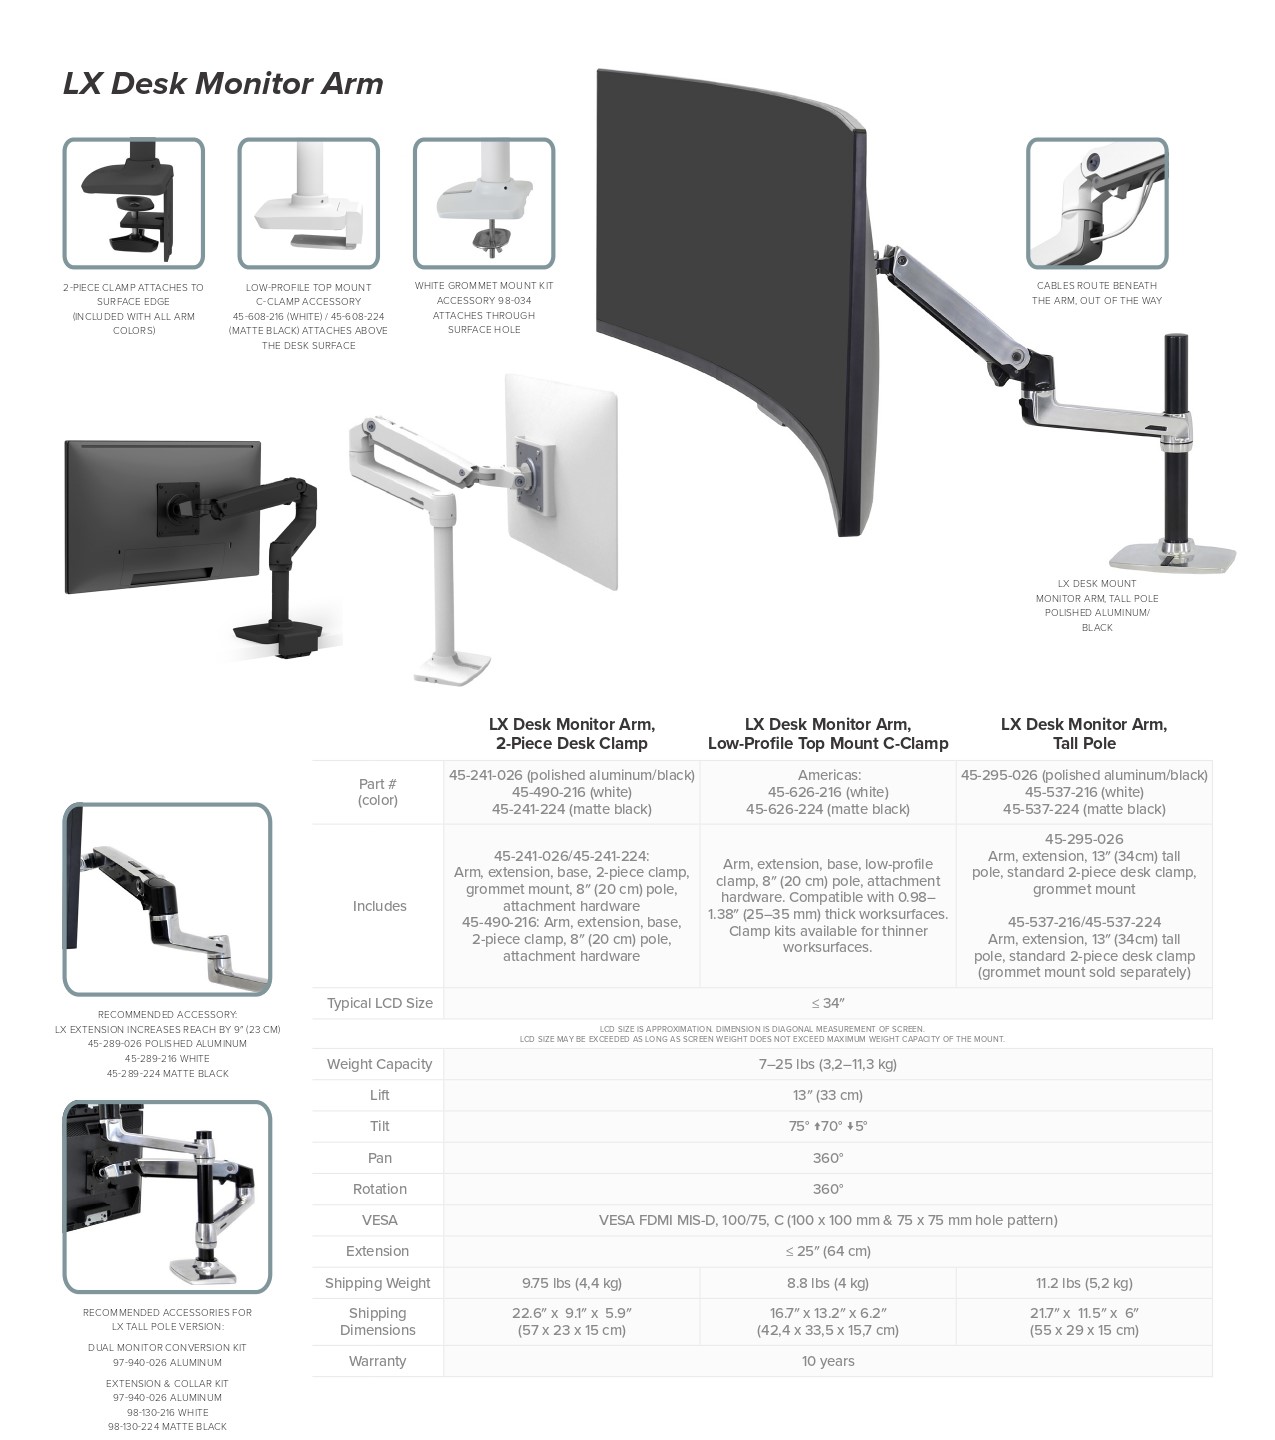 A large marketing image providing additional information about the product Ergotron LX Desk Monitor Arm Tall Pole - Polished Aluminum - Additional alt info not provided